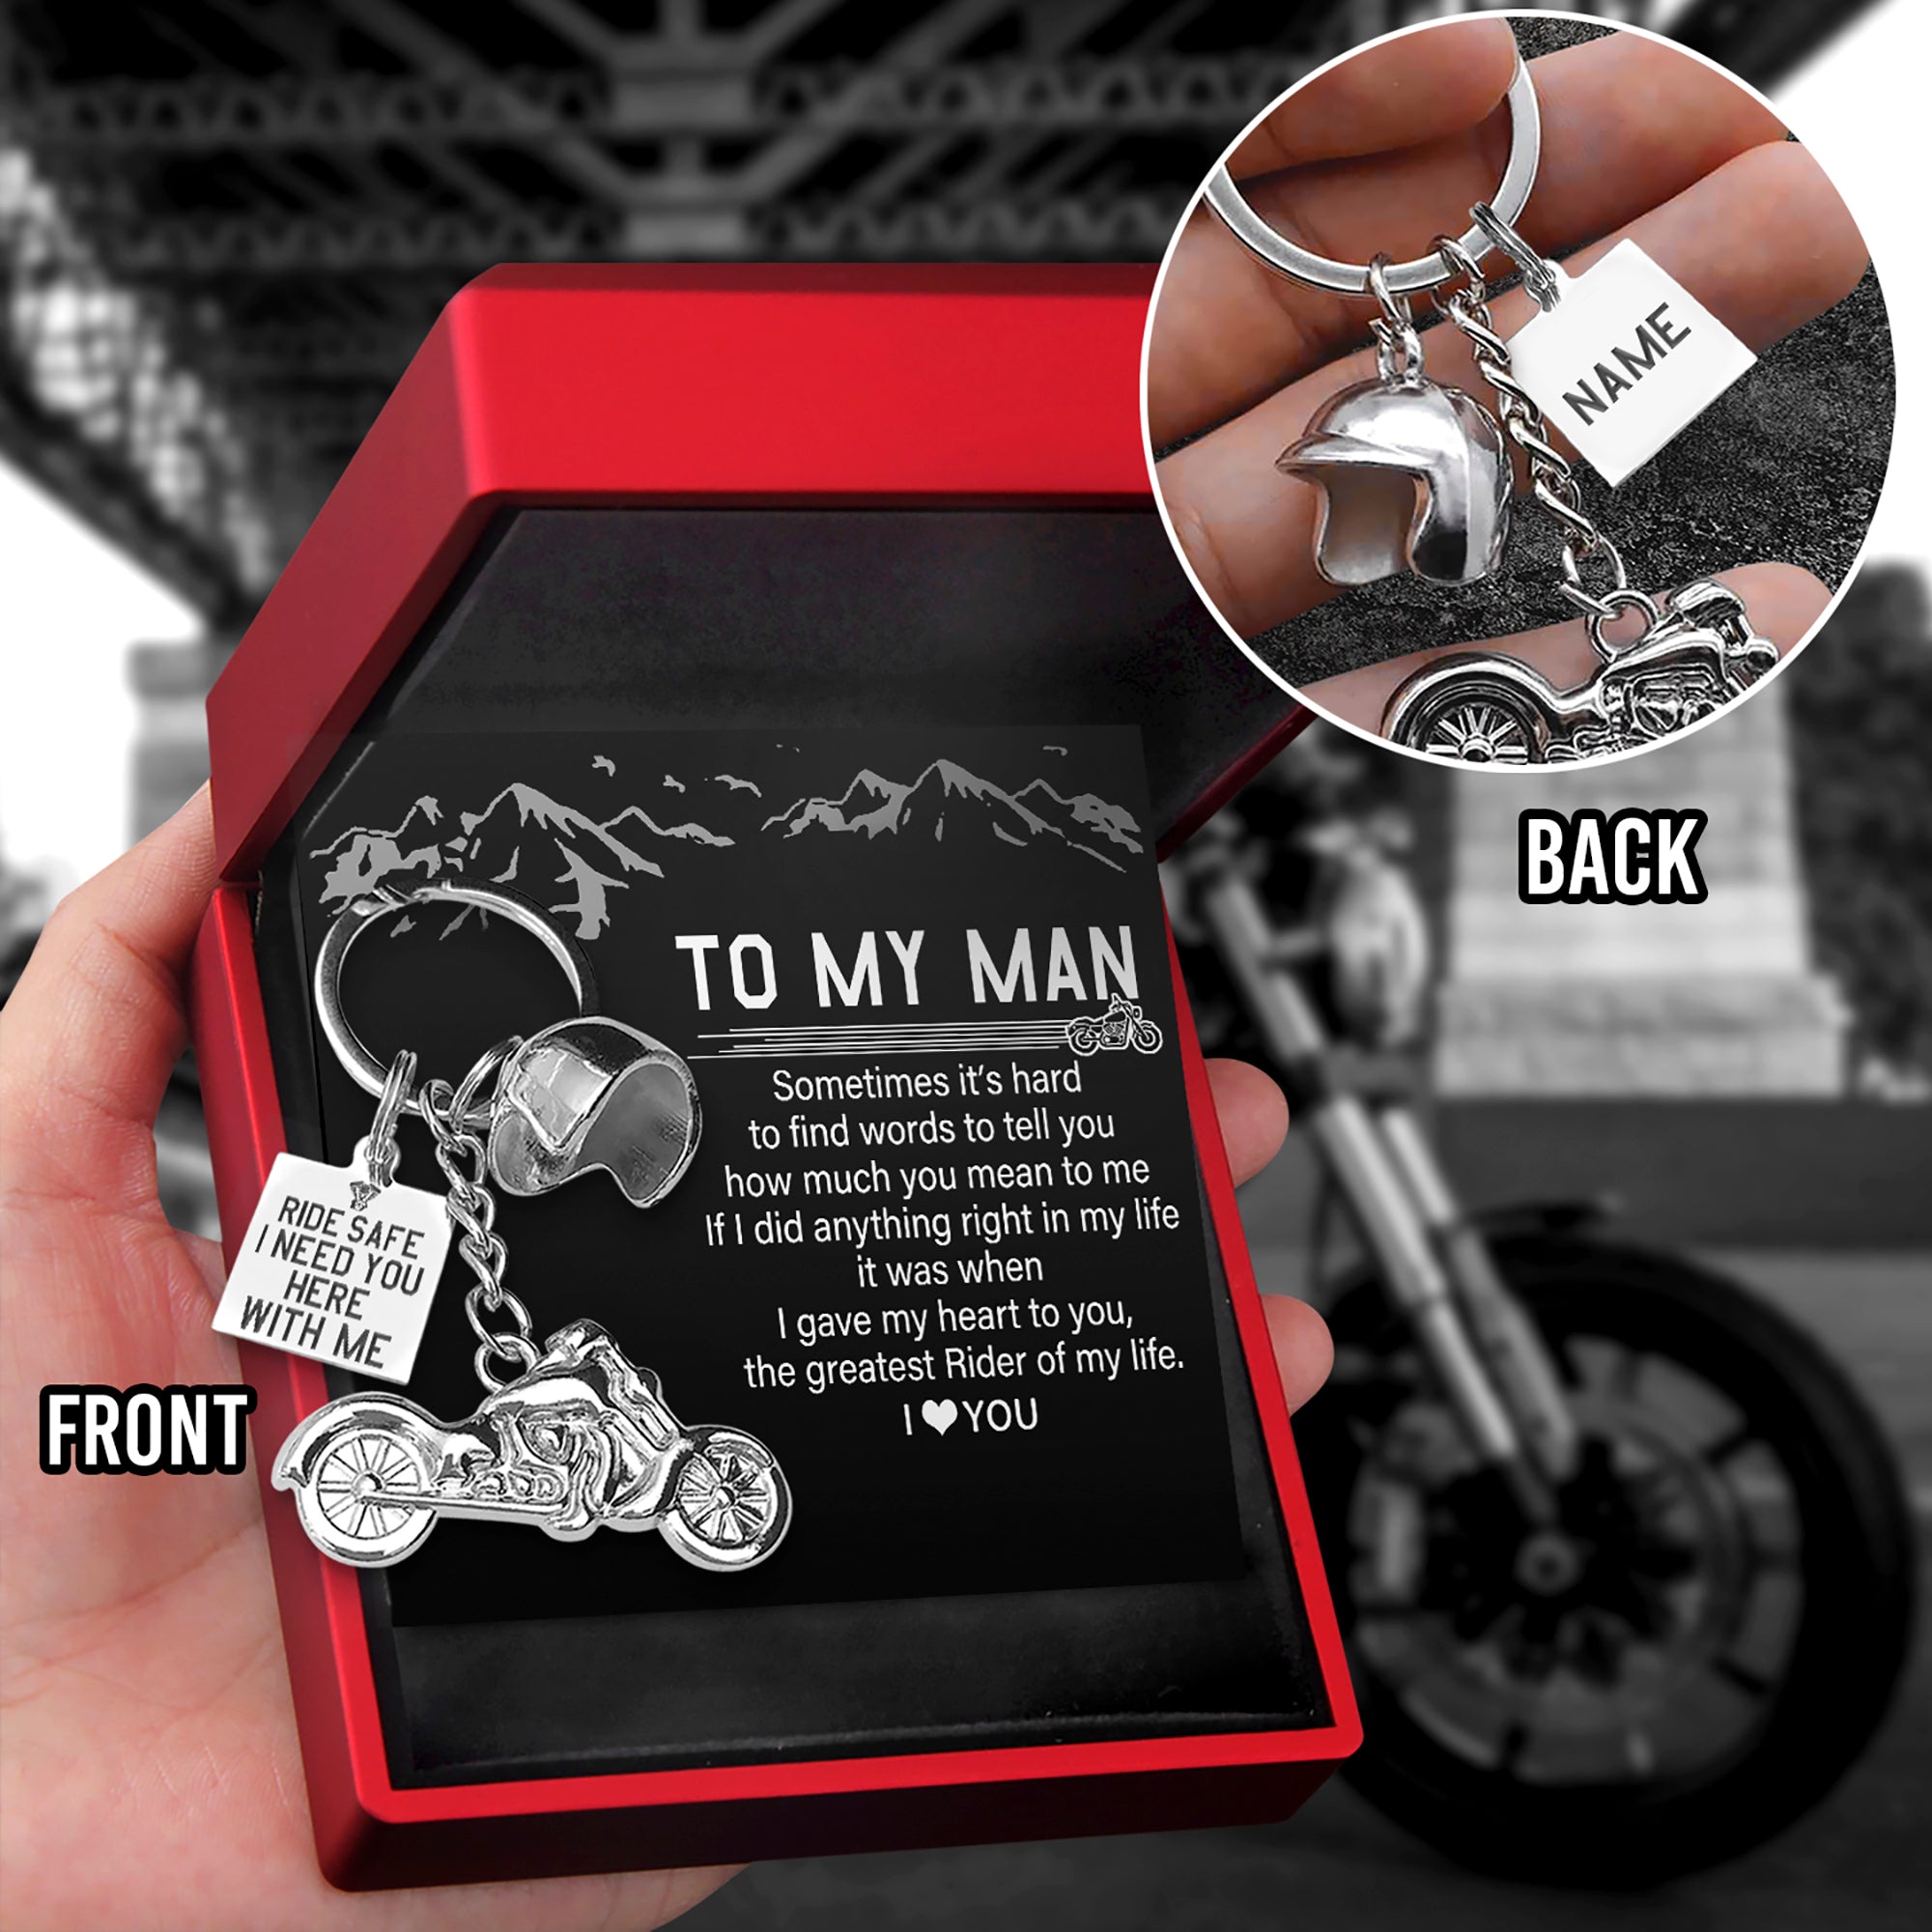 Rev Up His Christmas! Motorcycle Keychain He'll Treasure - Gkt26001